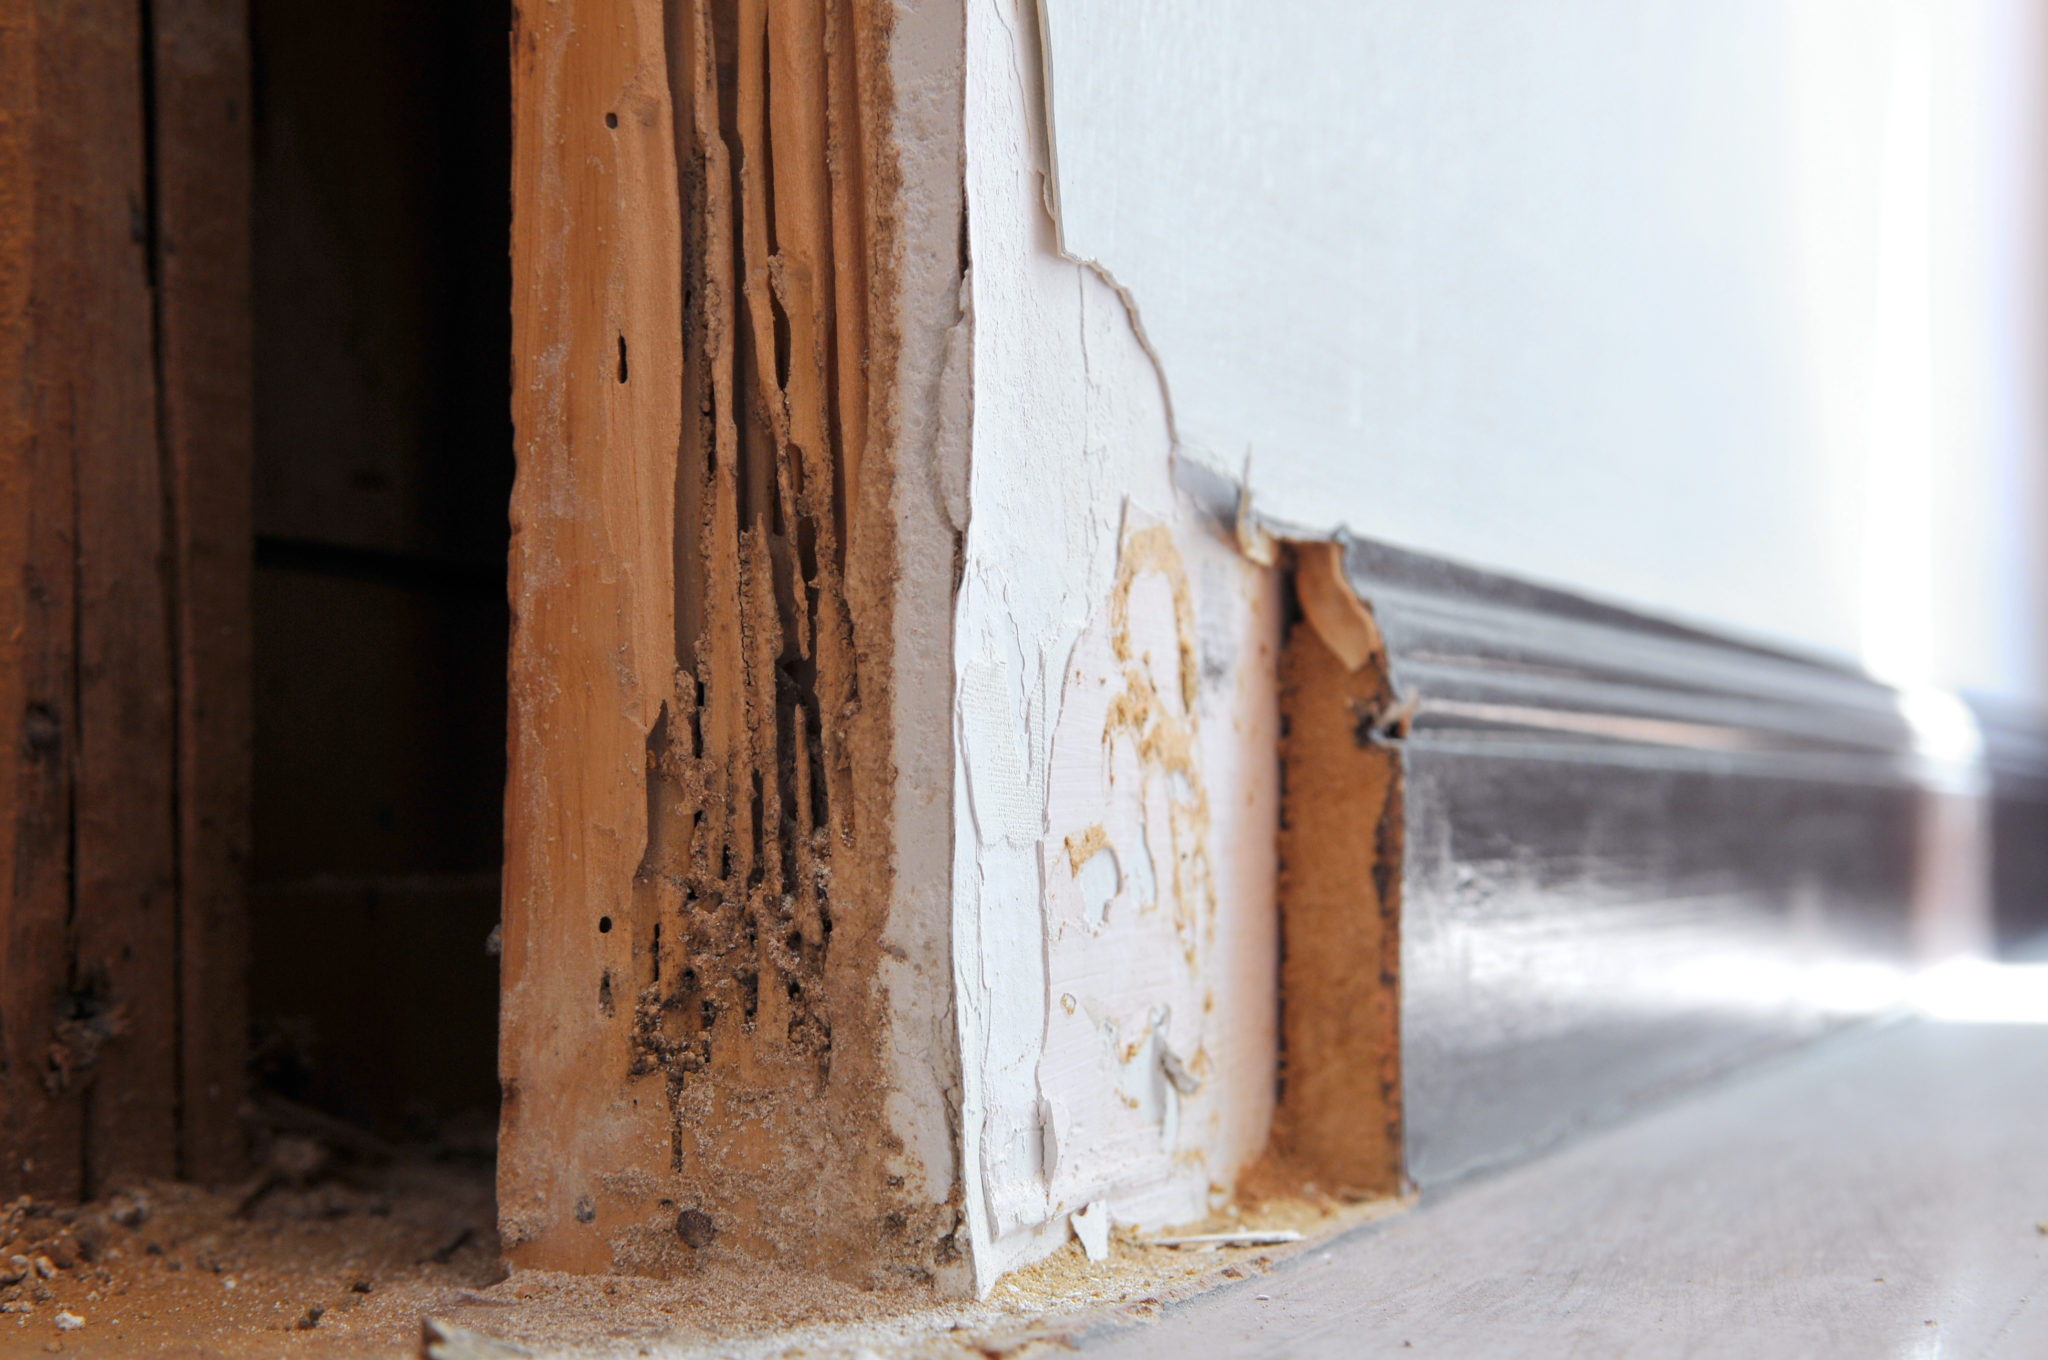 Box Hill - termite damage to skirting board in home